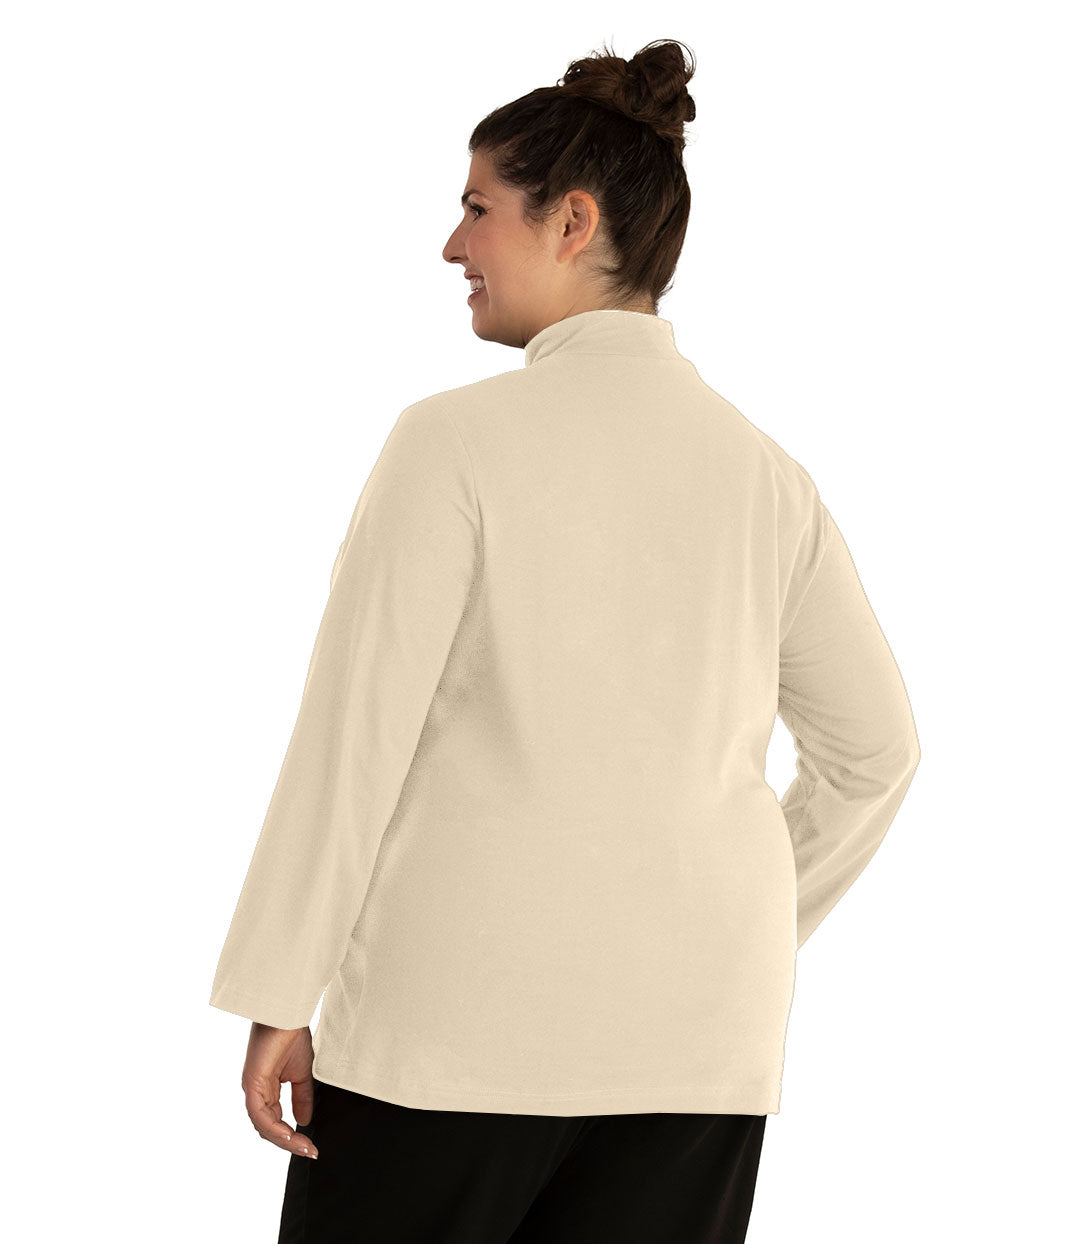 Plus size woman, facing back looking left, wearing JunoActive plus size Stretch Naturals Lite Mock Neck Top in the color Cream. She is wearing JunoActive Plus Size Leggings in the color Black.